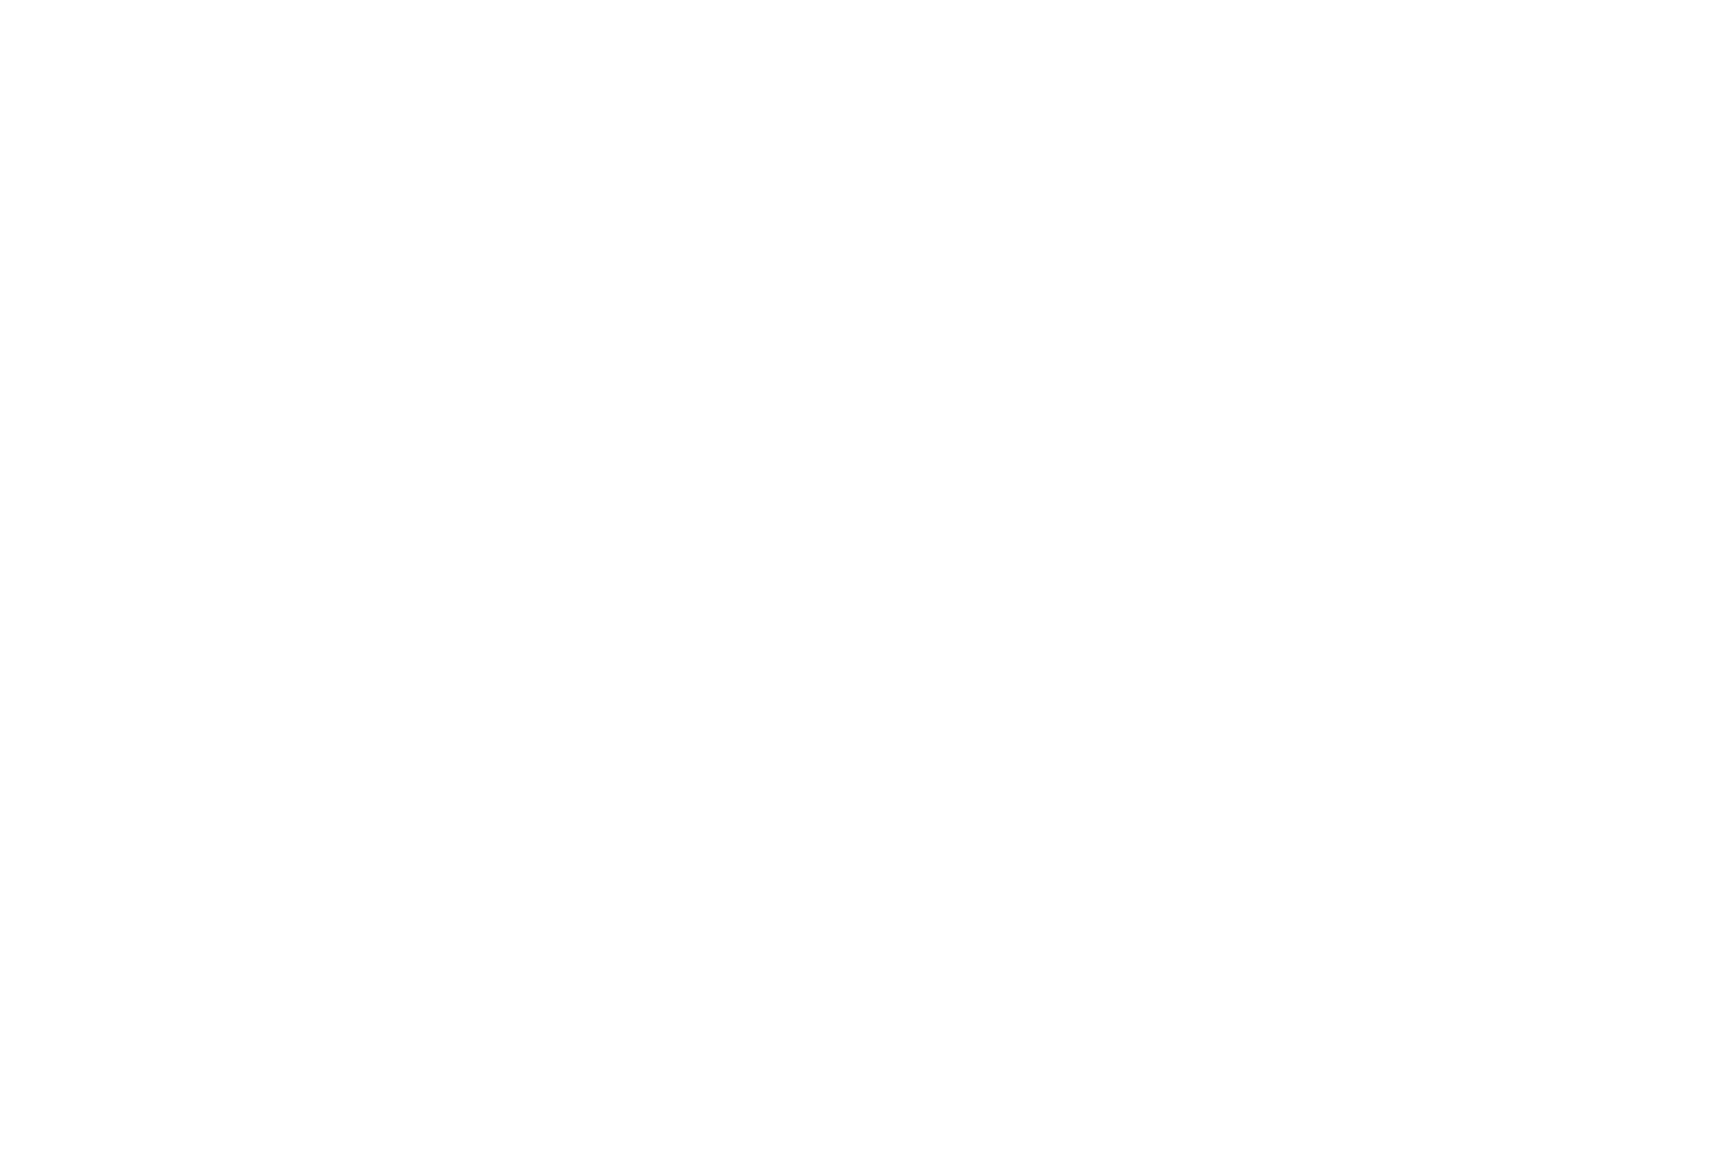 WINNER  - DIRECTOR OF THE MONTH  - DOMFF 2016 (1).png